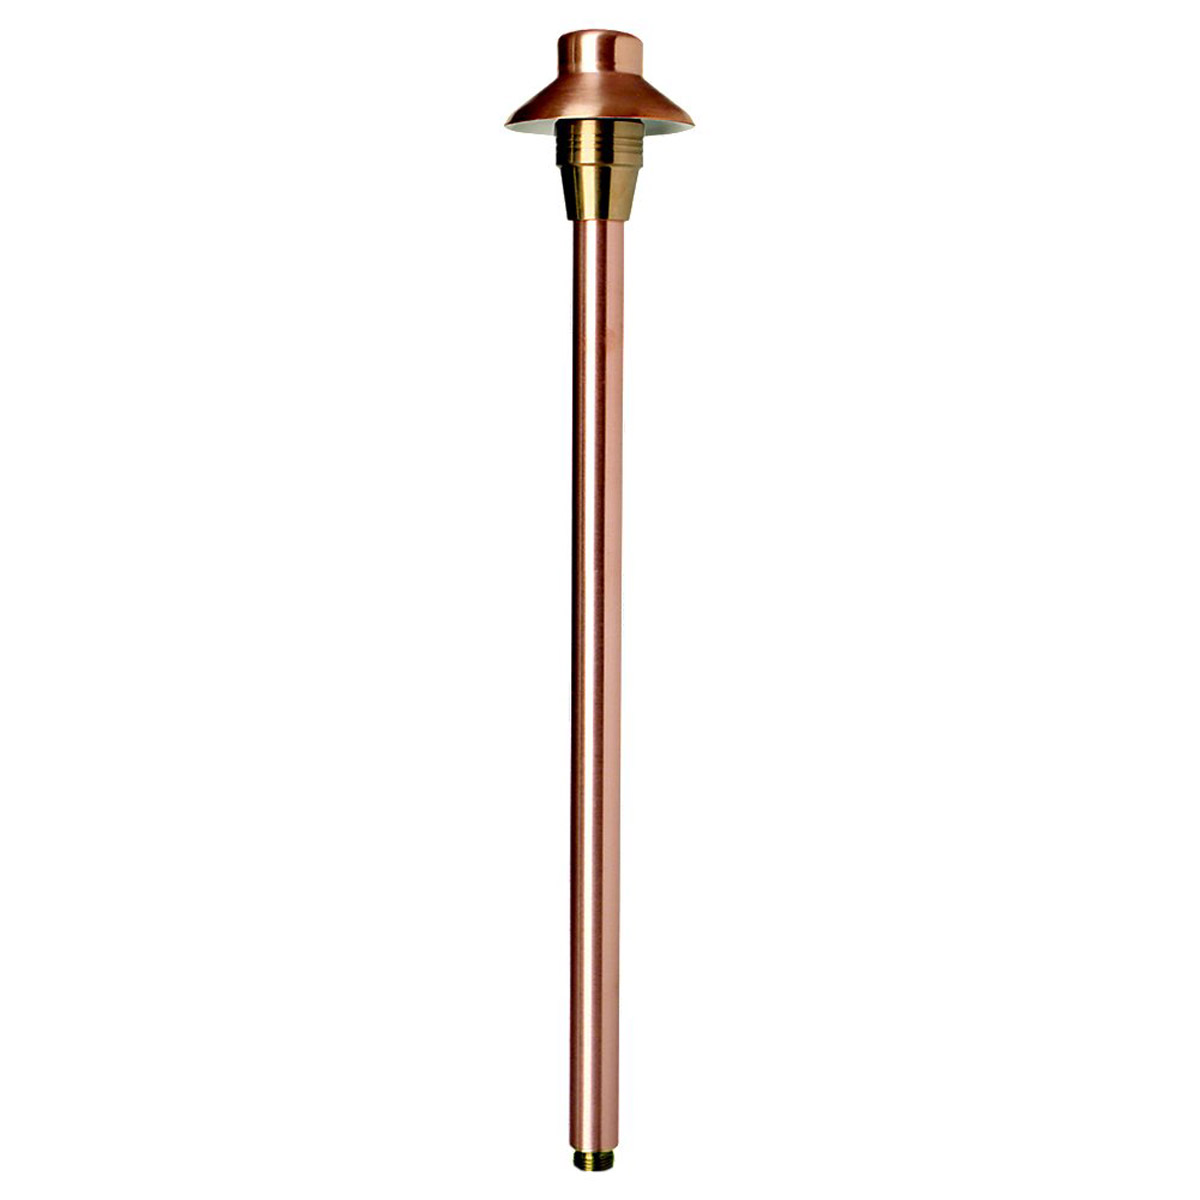 Sea Gull Lighting Cypress-Unique 1 Light Landscape Path Light in Weathered Brass 91166-148